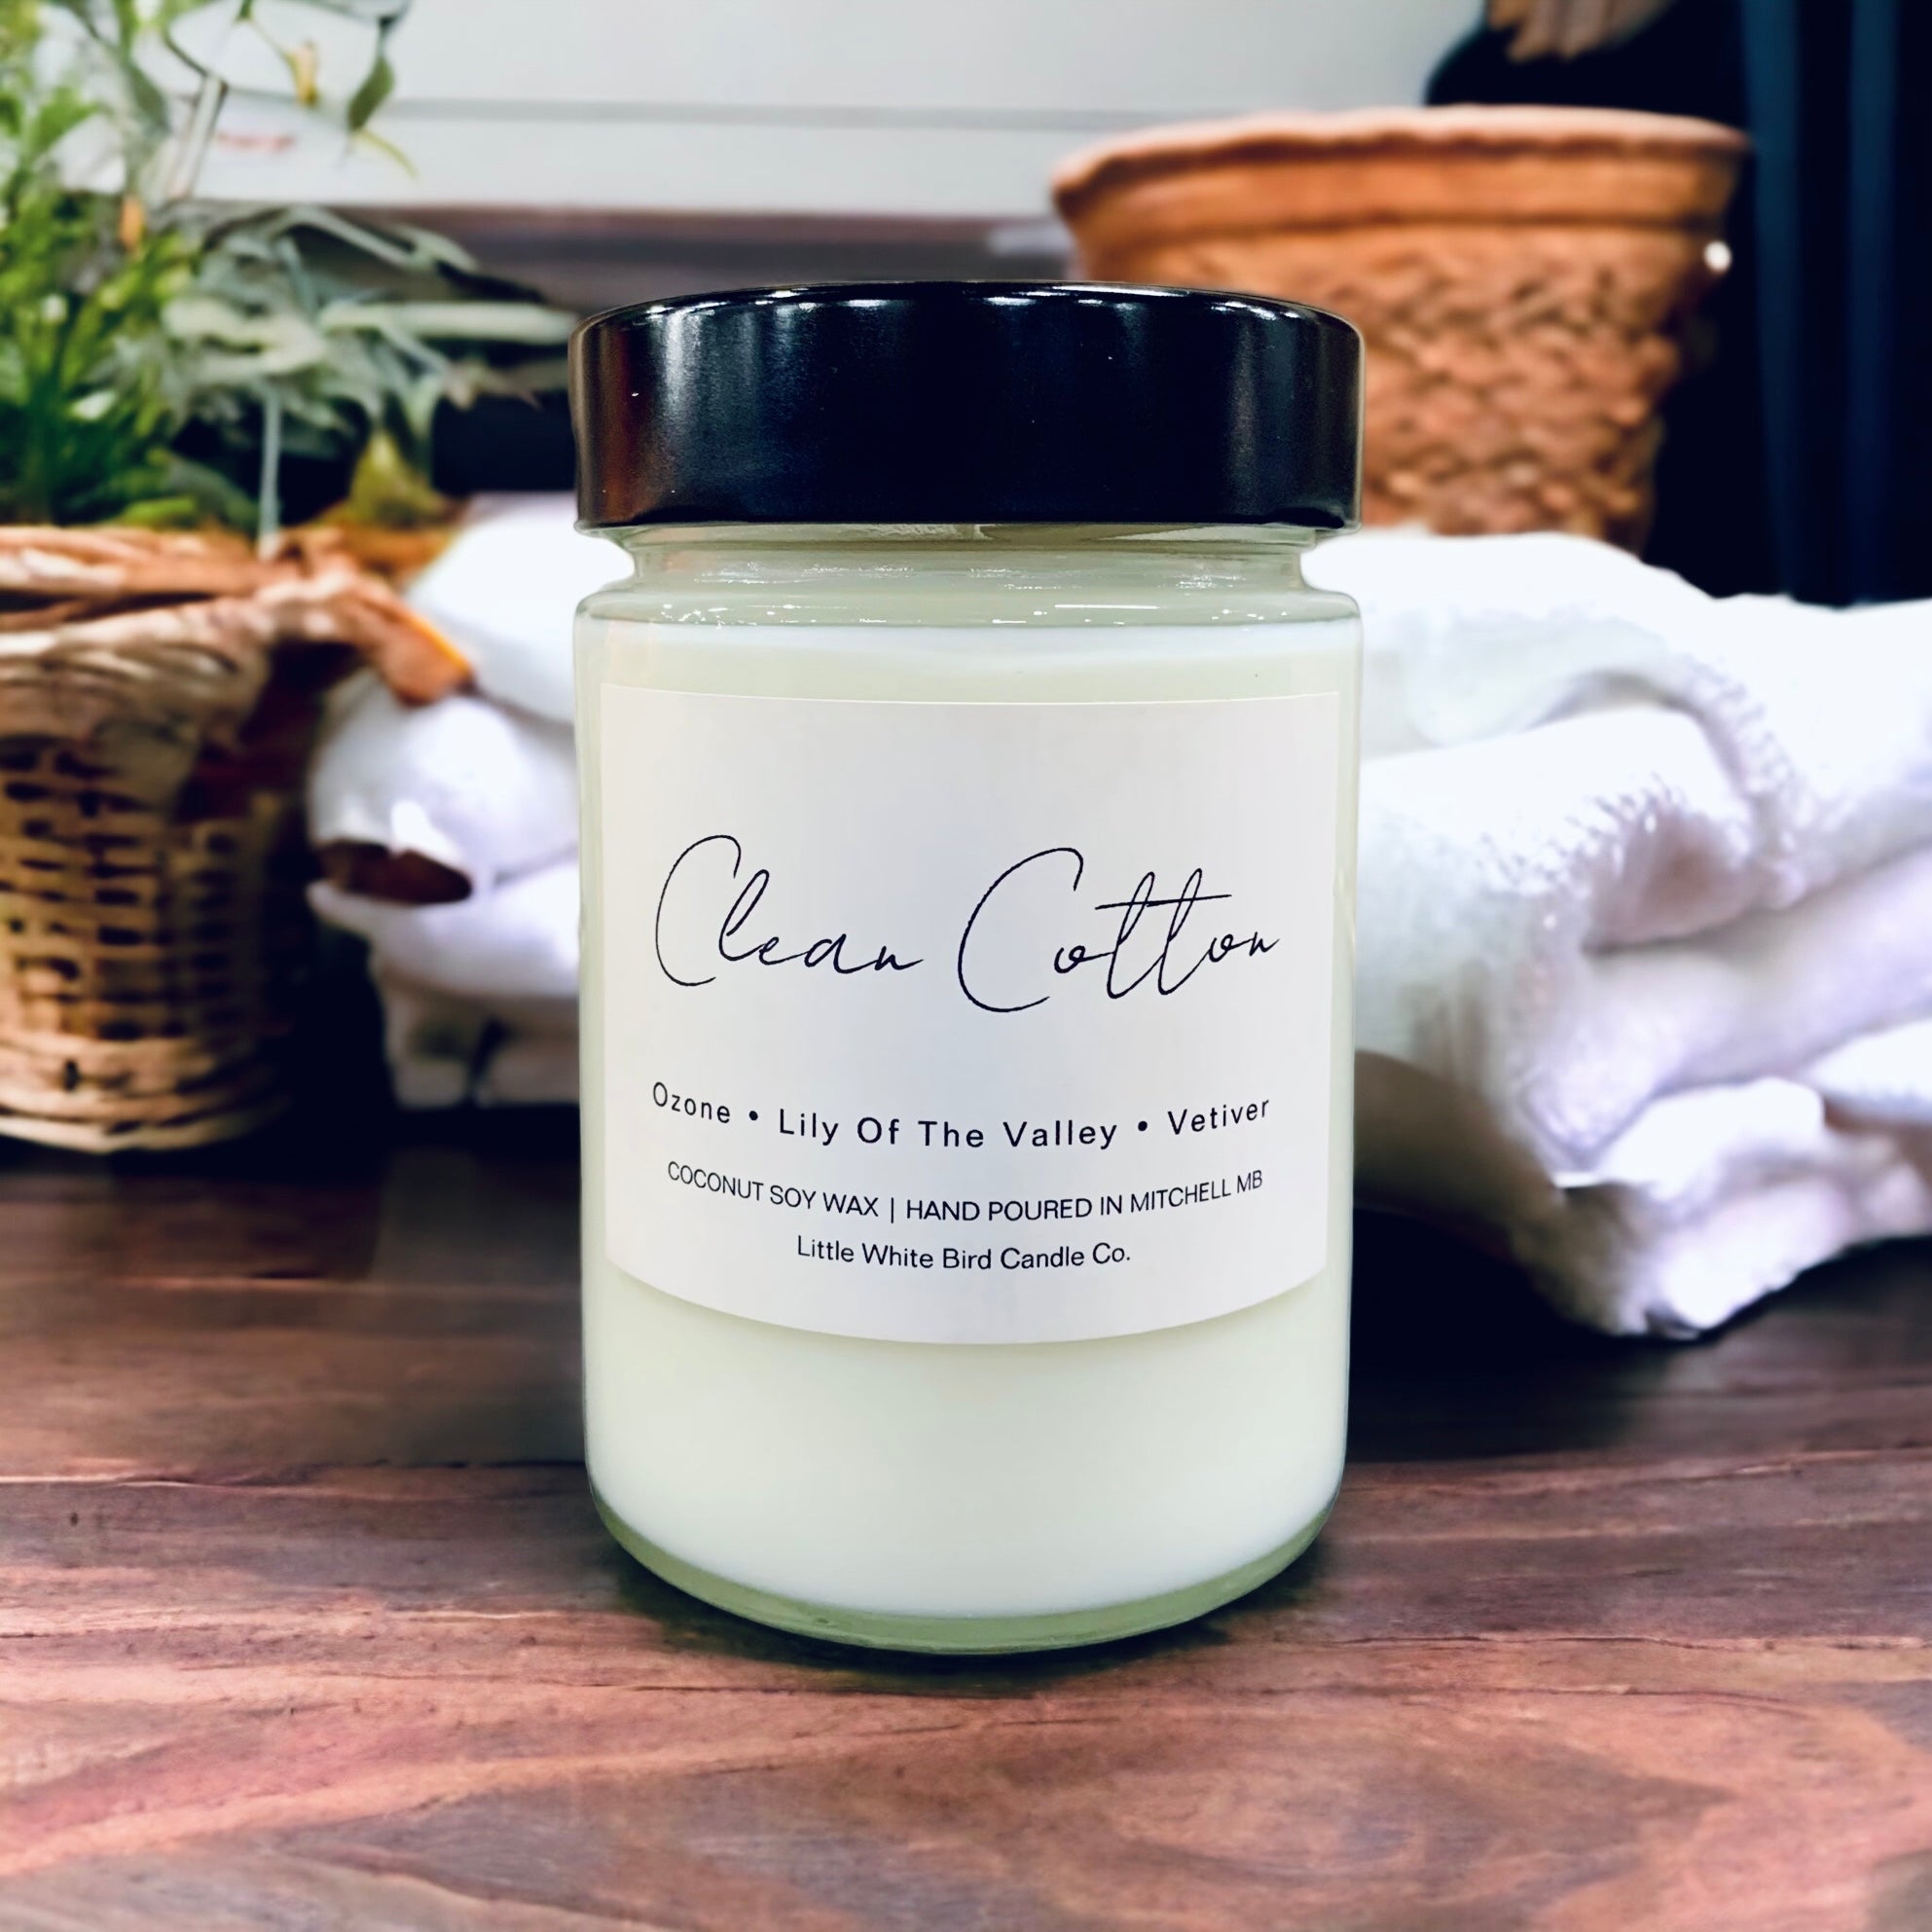 10oz Clean Cotton Candle • Ozone • Lily Of The Valley • Vetiver